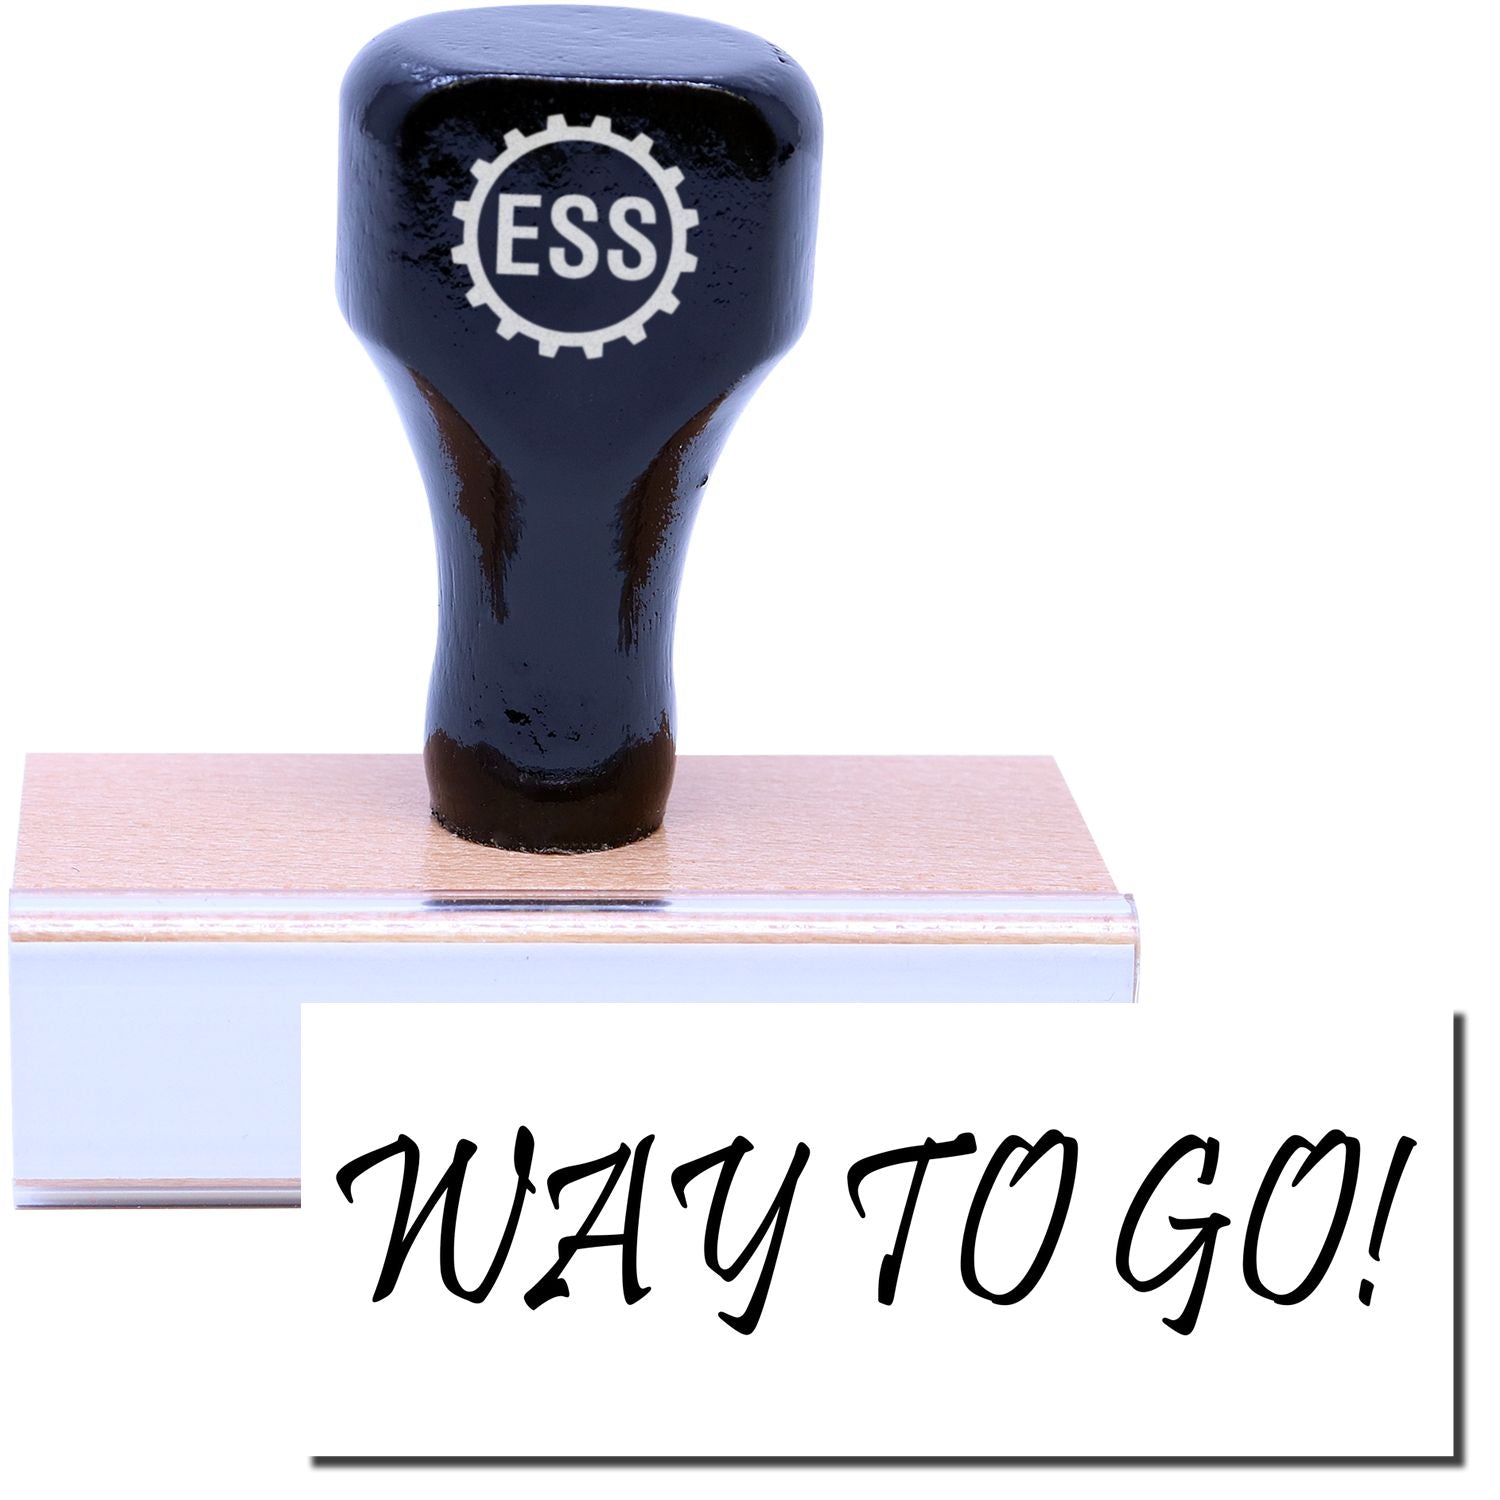 A stock office rubber stamp with a stamped image showing how the text "WAY TO GO!" is displayed after stamping.